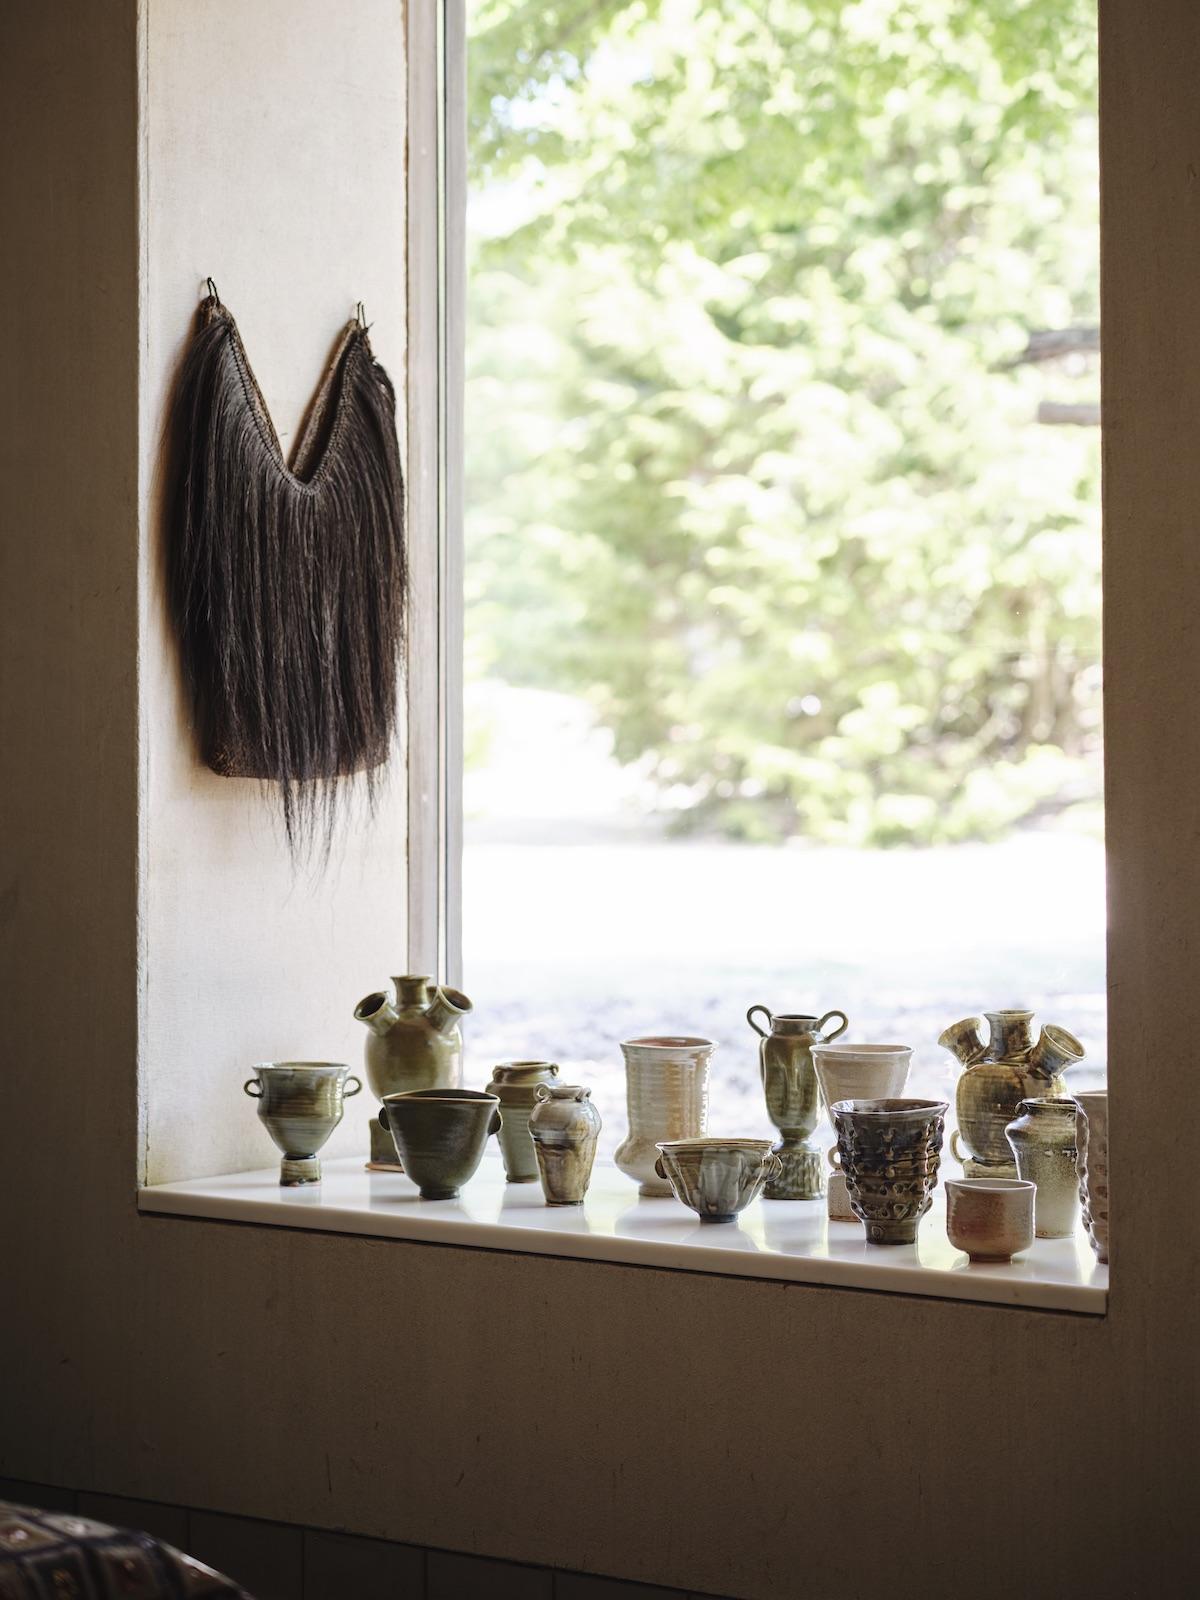 A Summer Arrangement: Object & Thing at LongHouse. LongHouse, East Hampton, New York. Photo by Adrian Gaut. Works pictured: Wood fired ceramics by Frances Palmer arranged in the windowsill inspired by other displays at LongHouse.